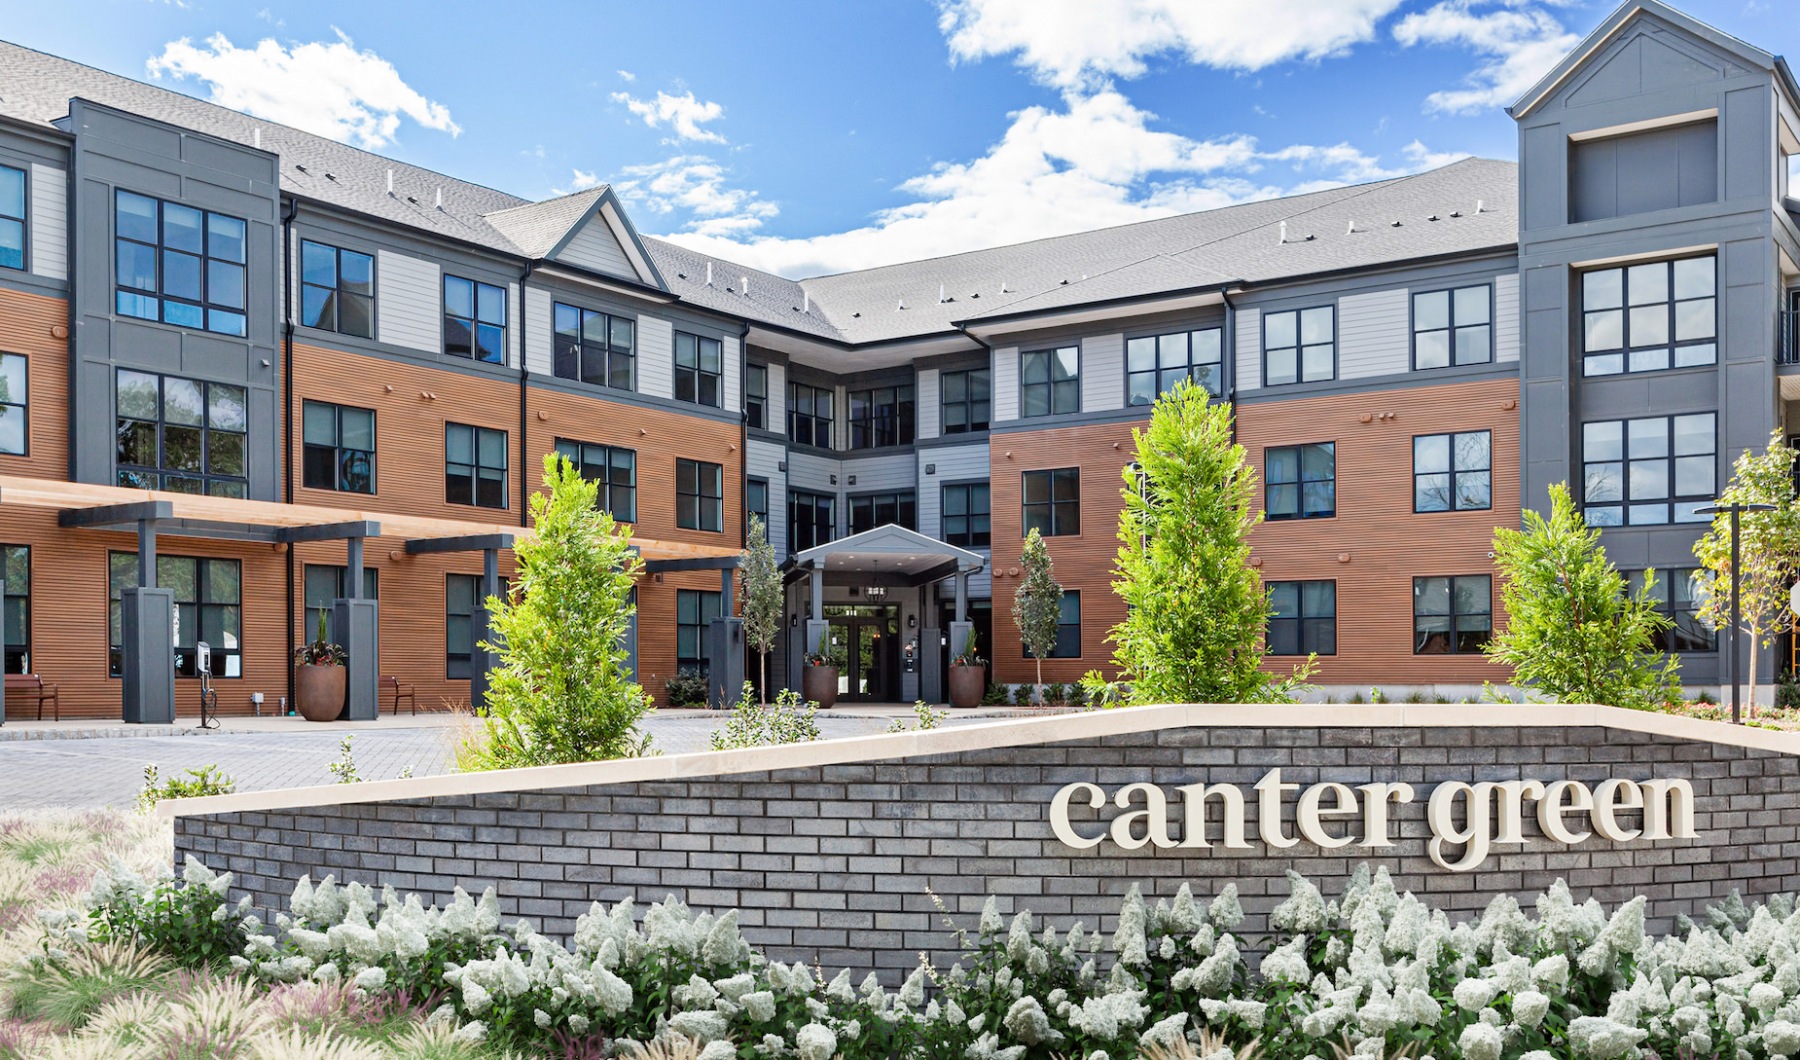 Canter Green luxury apartments